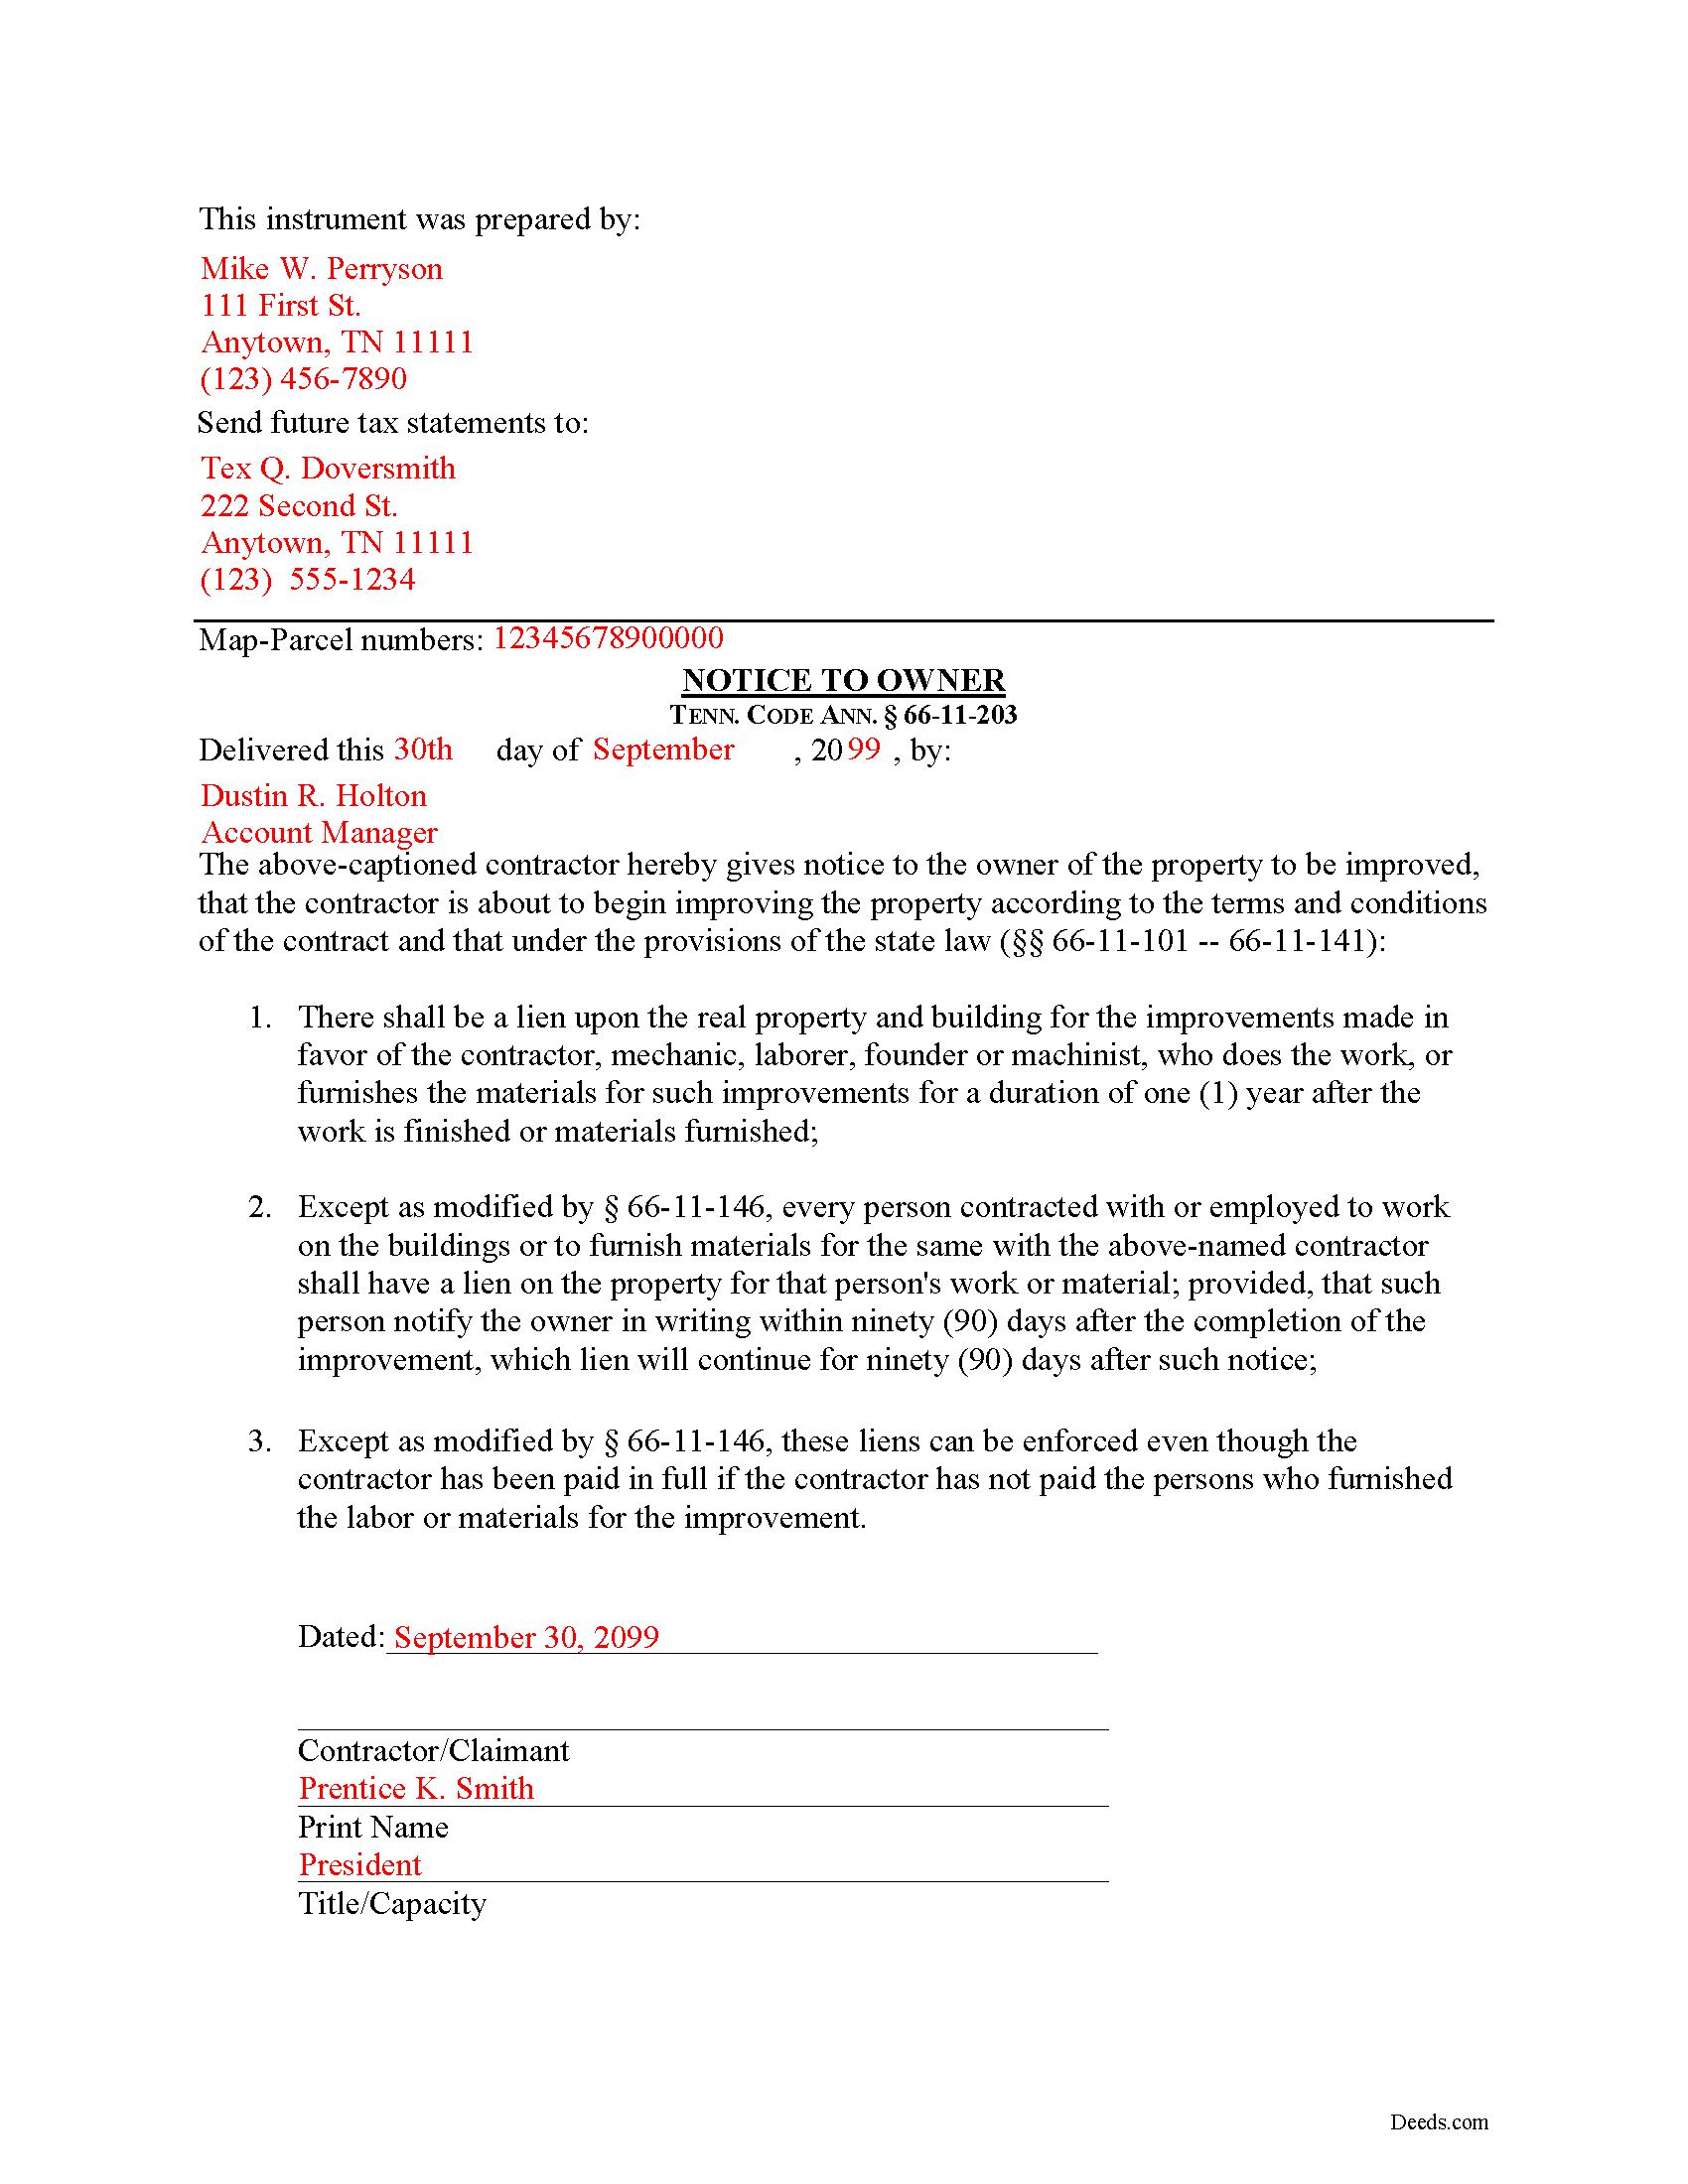 Completed Example of the Notice to Owner Document